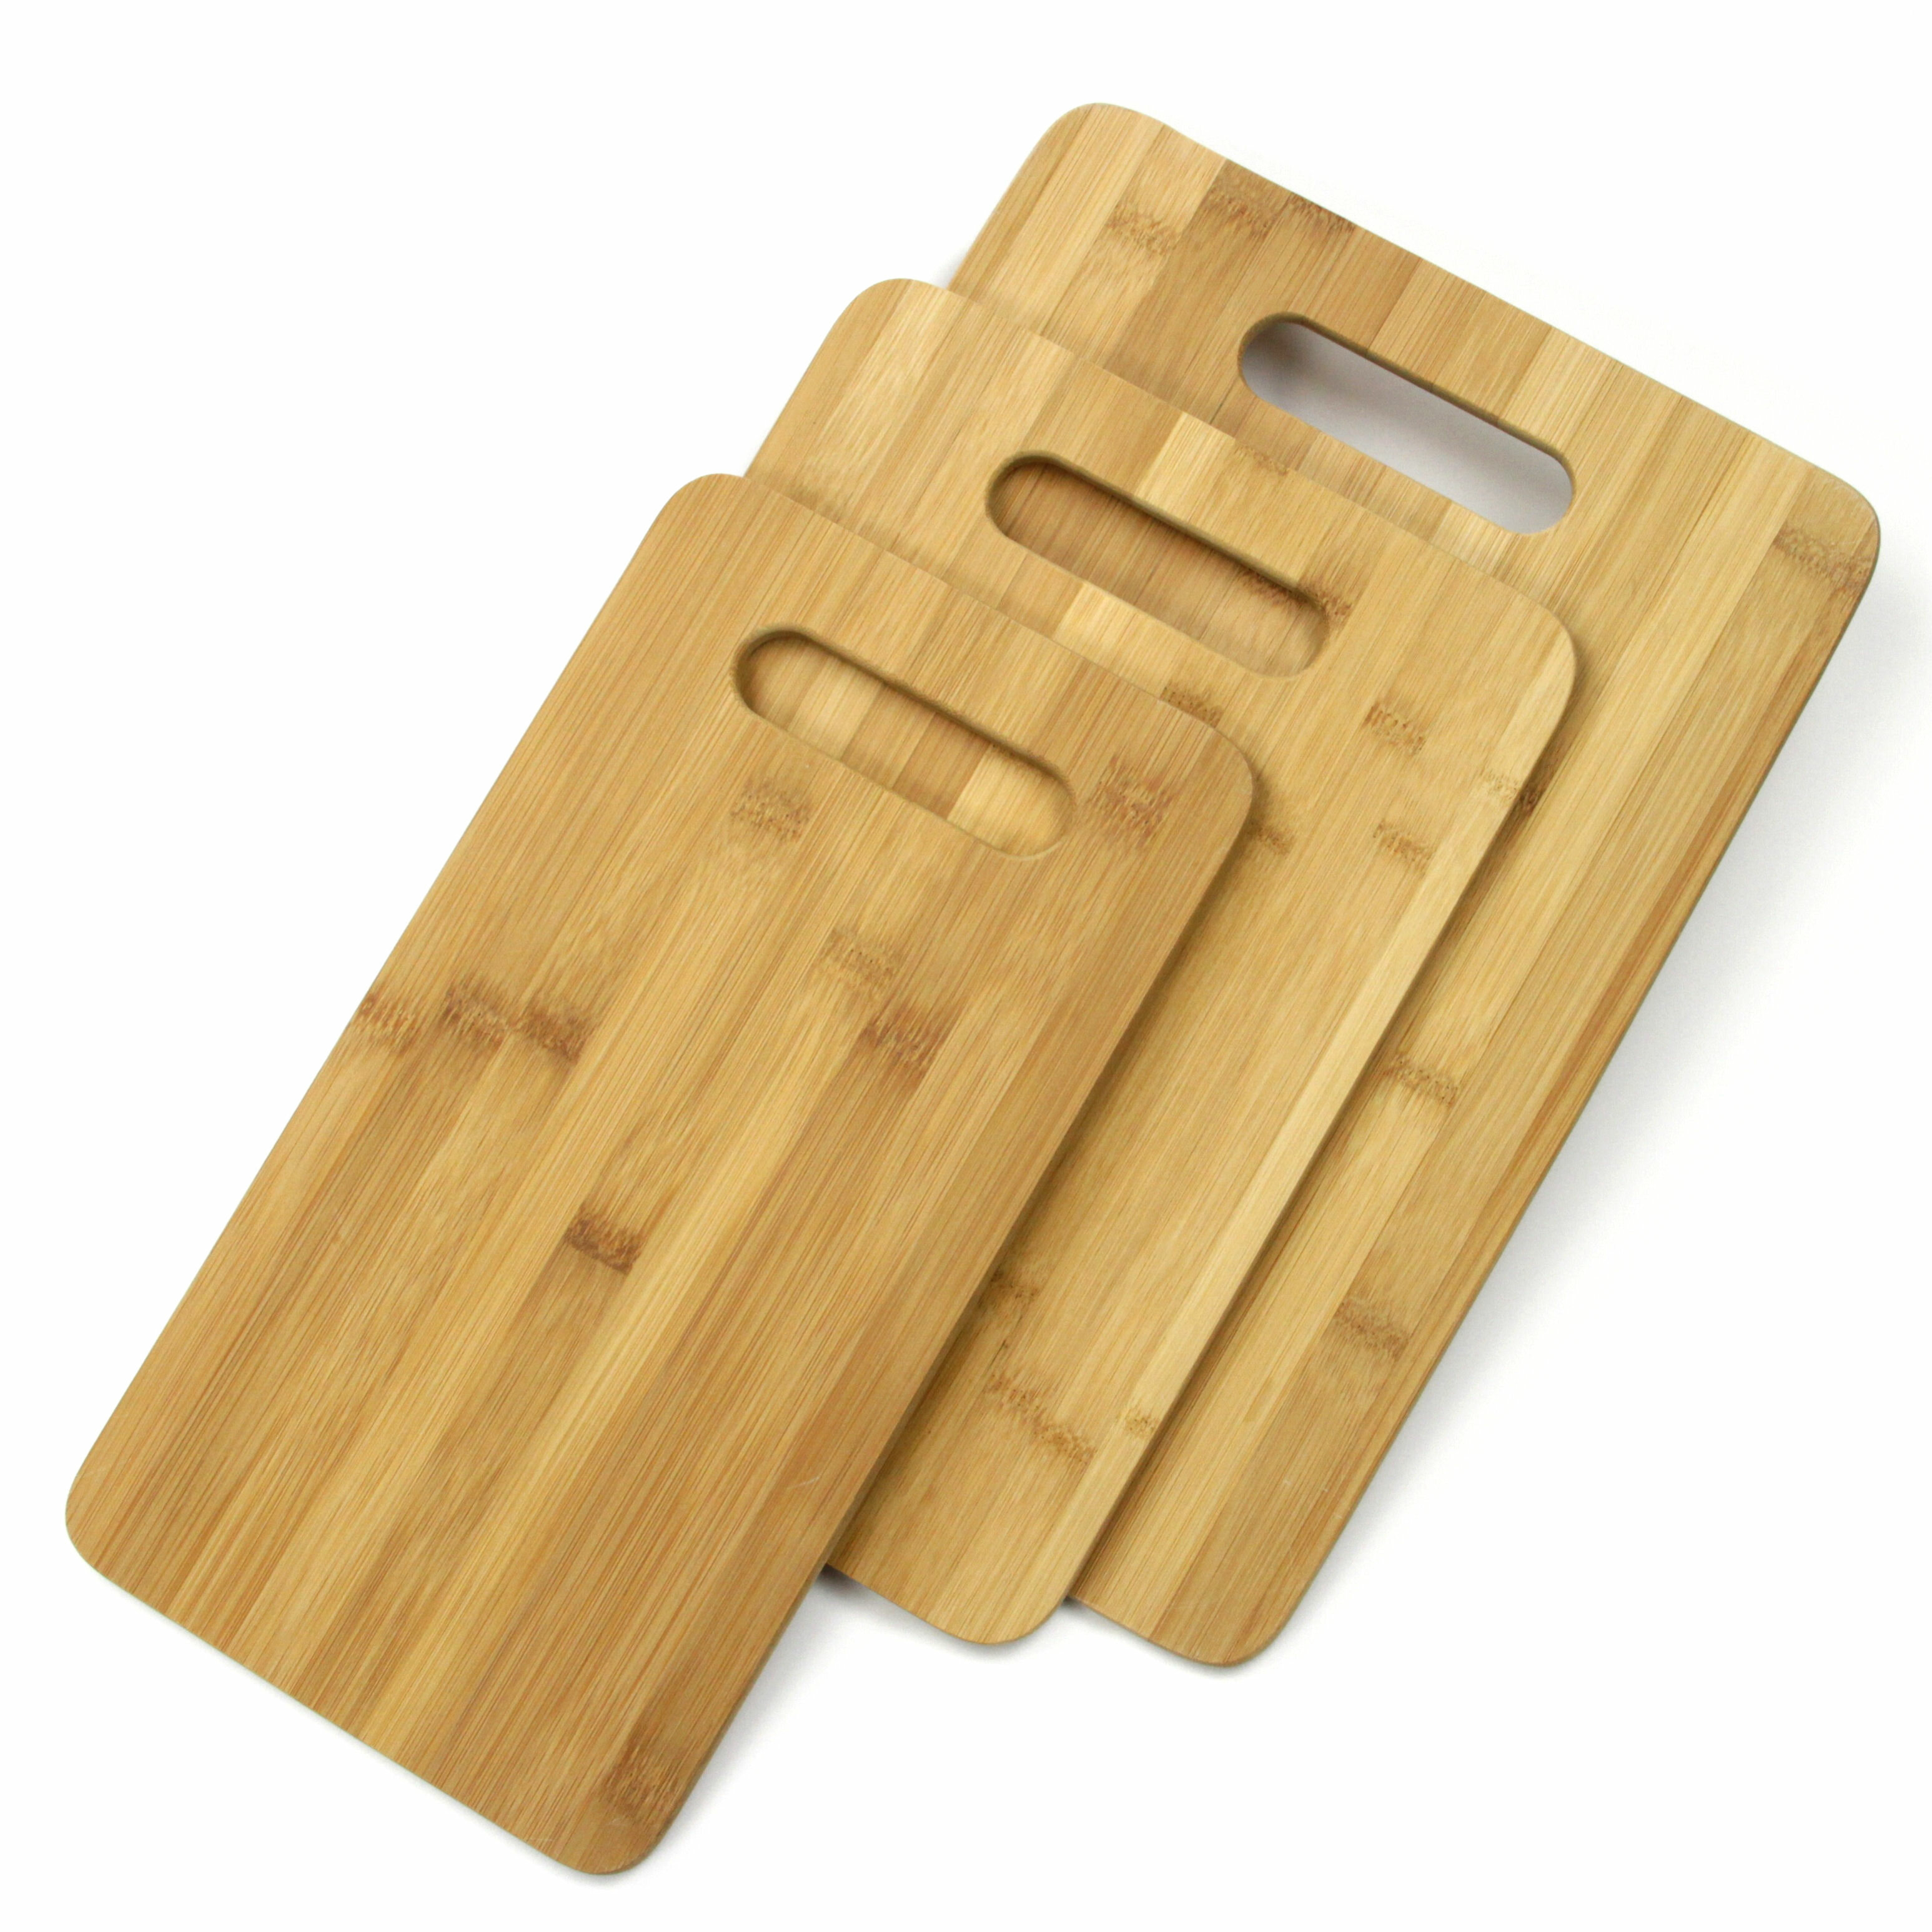 Chef Craft 3 Piece Bamboo Cutting Board Set & Reviews